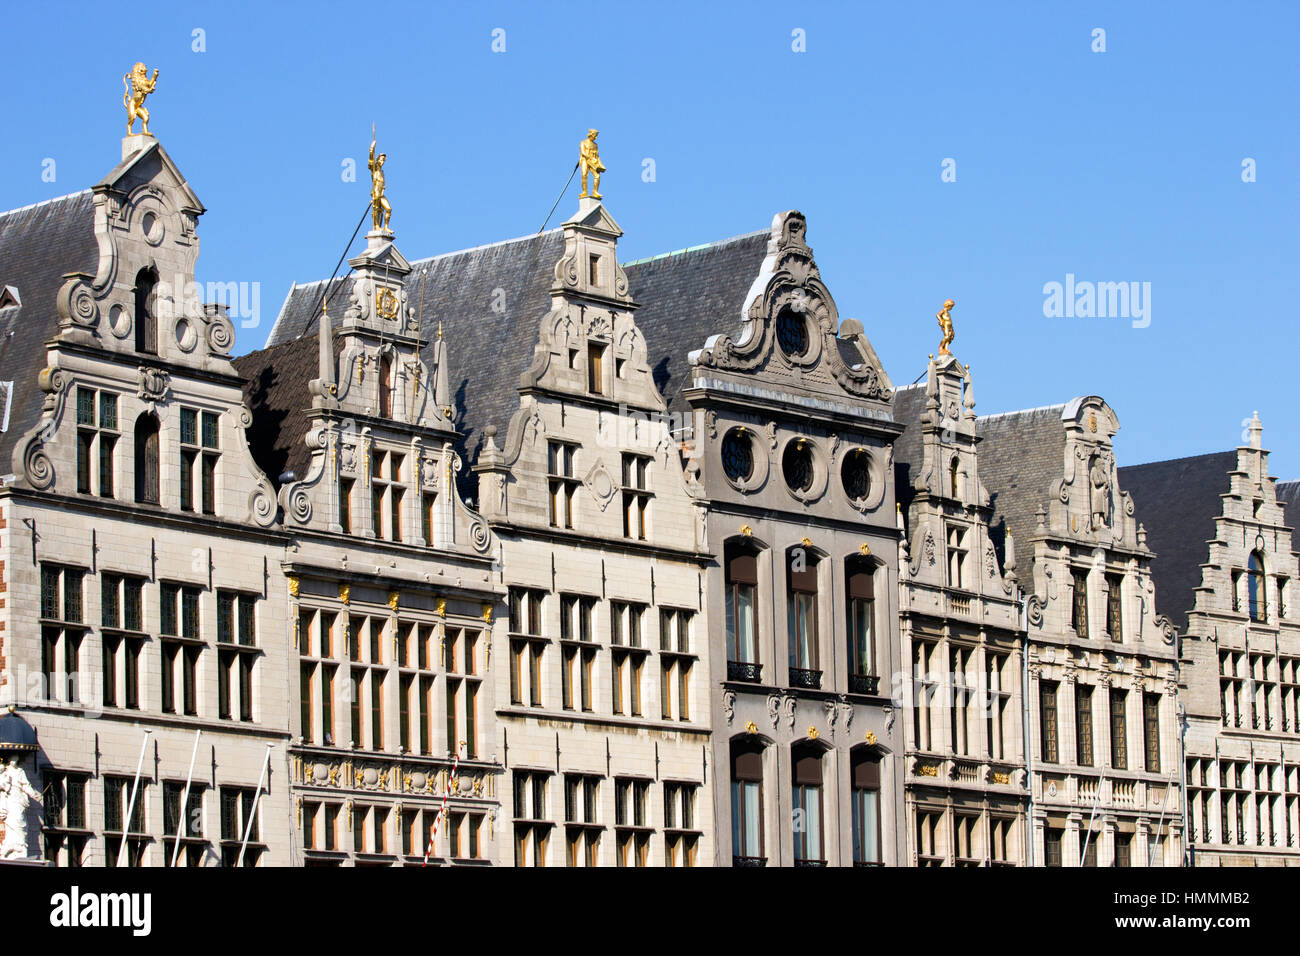 Facades of historical houses on the market square in Antwerp, Belgium Stock Photo